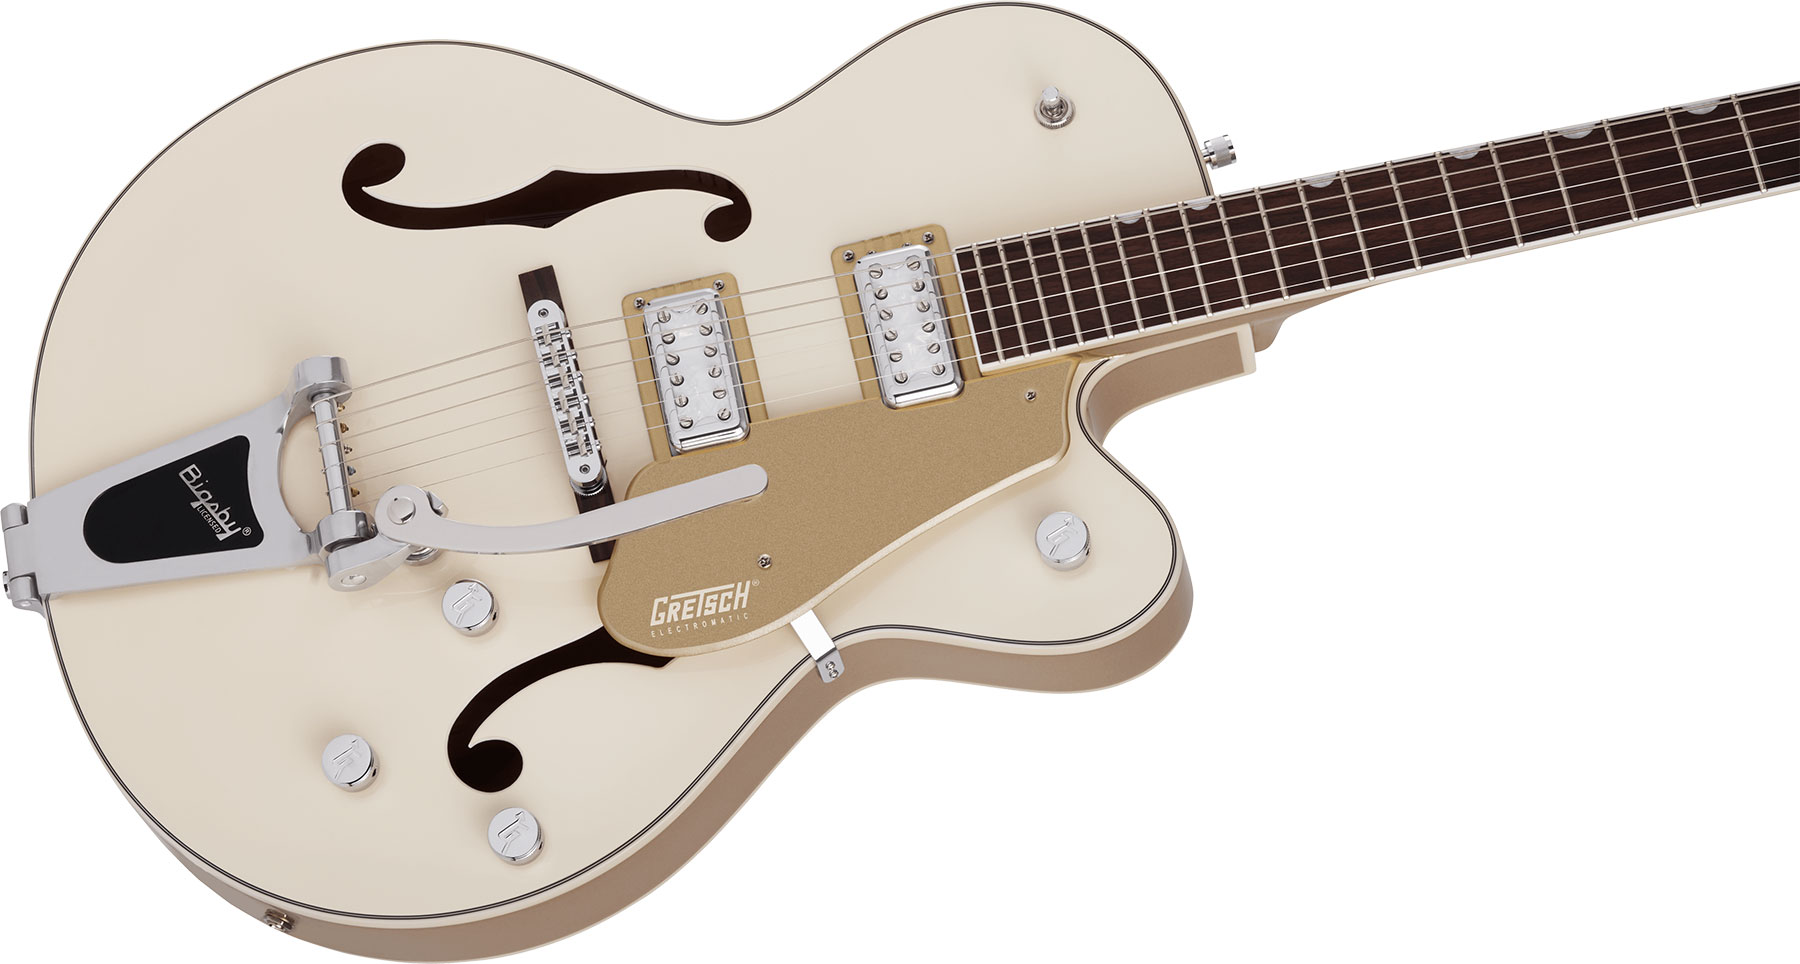 Gretsch G5410t Tri-five Electromatic Hollow Hh Bigsby Rw - Two-tone Vintage White/casino Gold - Guitare Électrique 1/2 Caisse - Variation 2